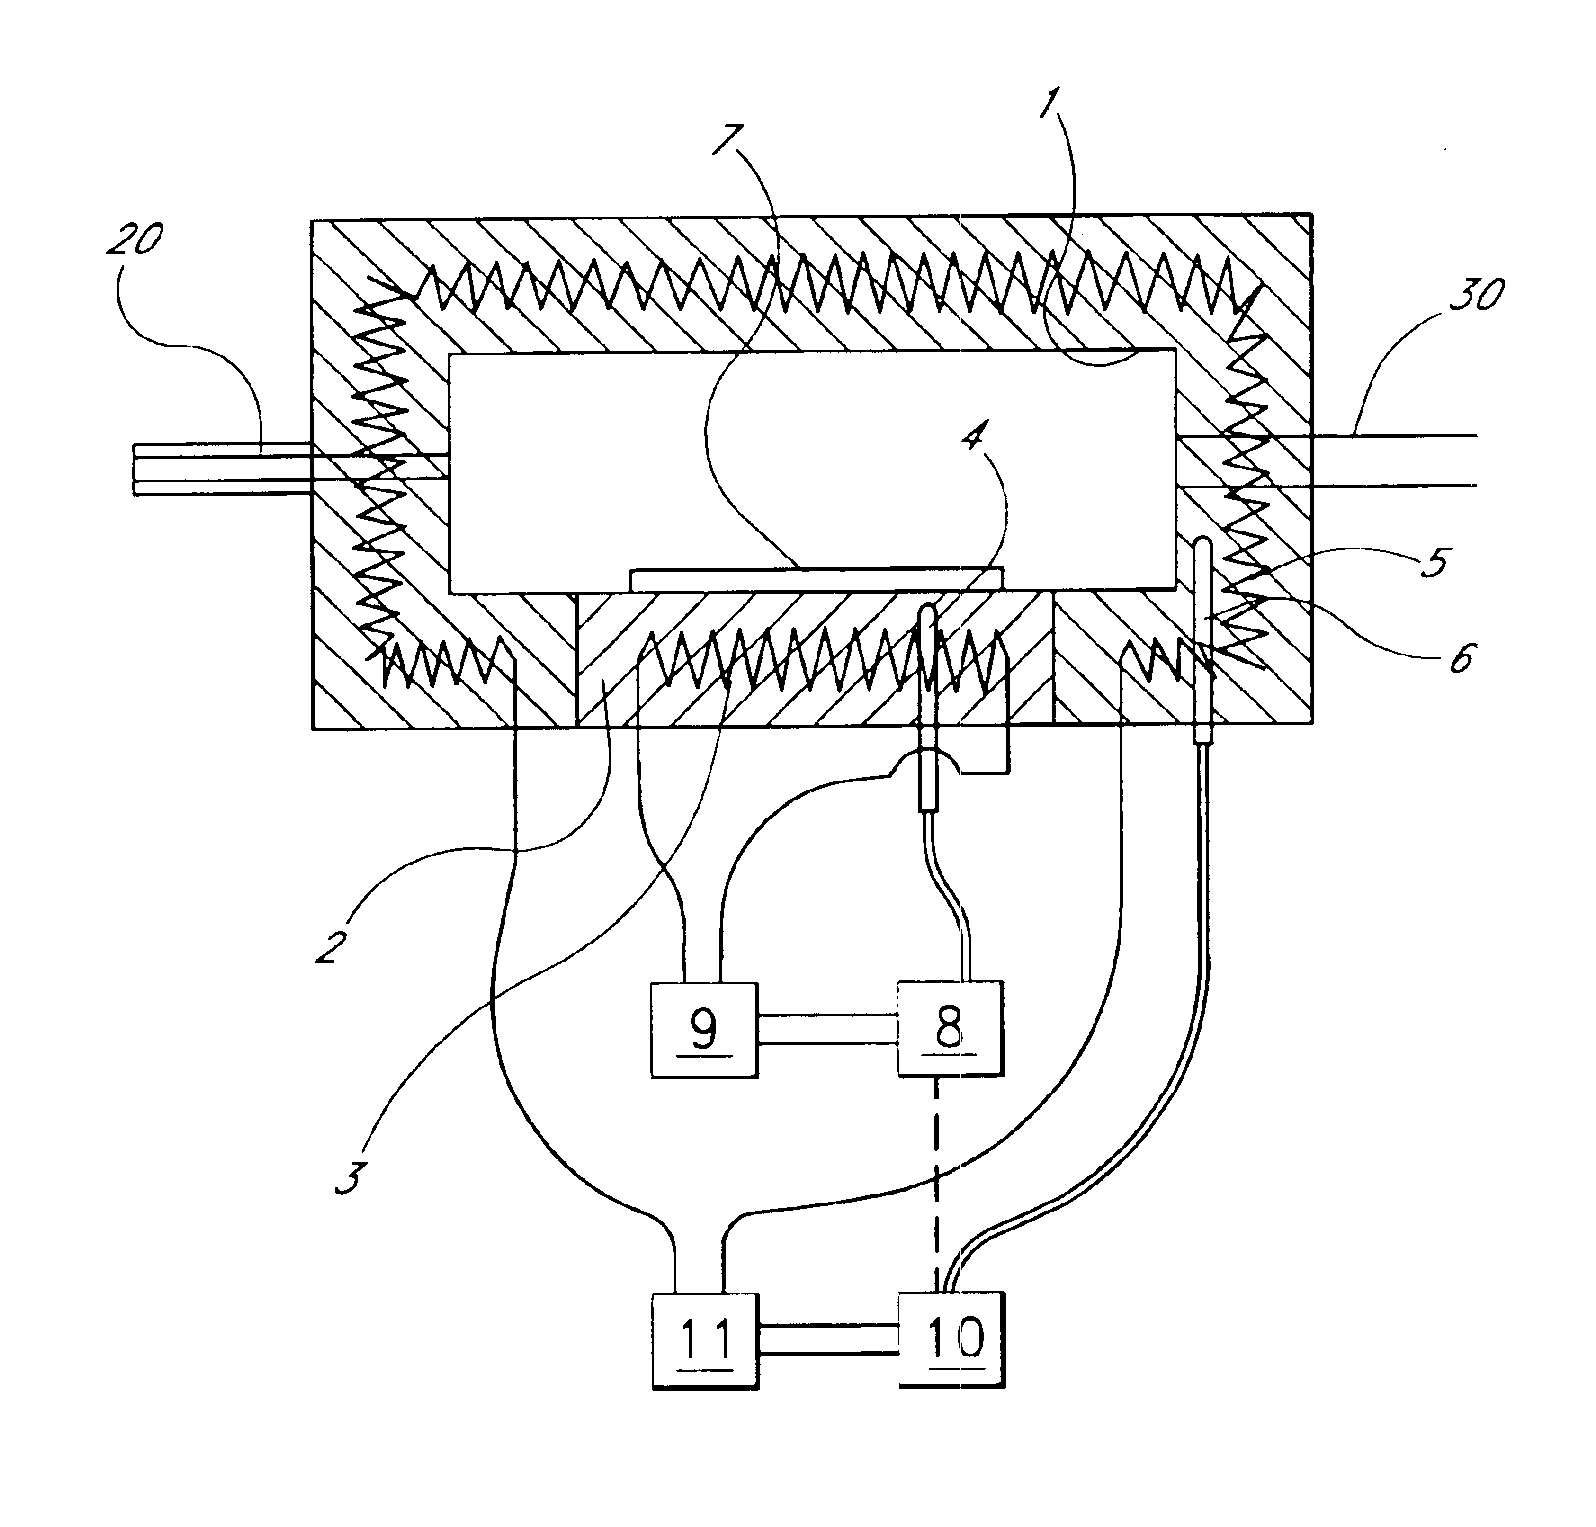 ALD reactor and method with controlled wall temperature